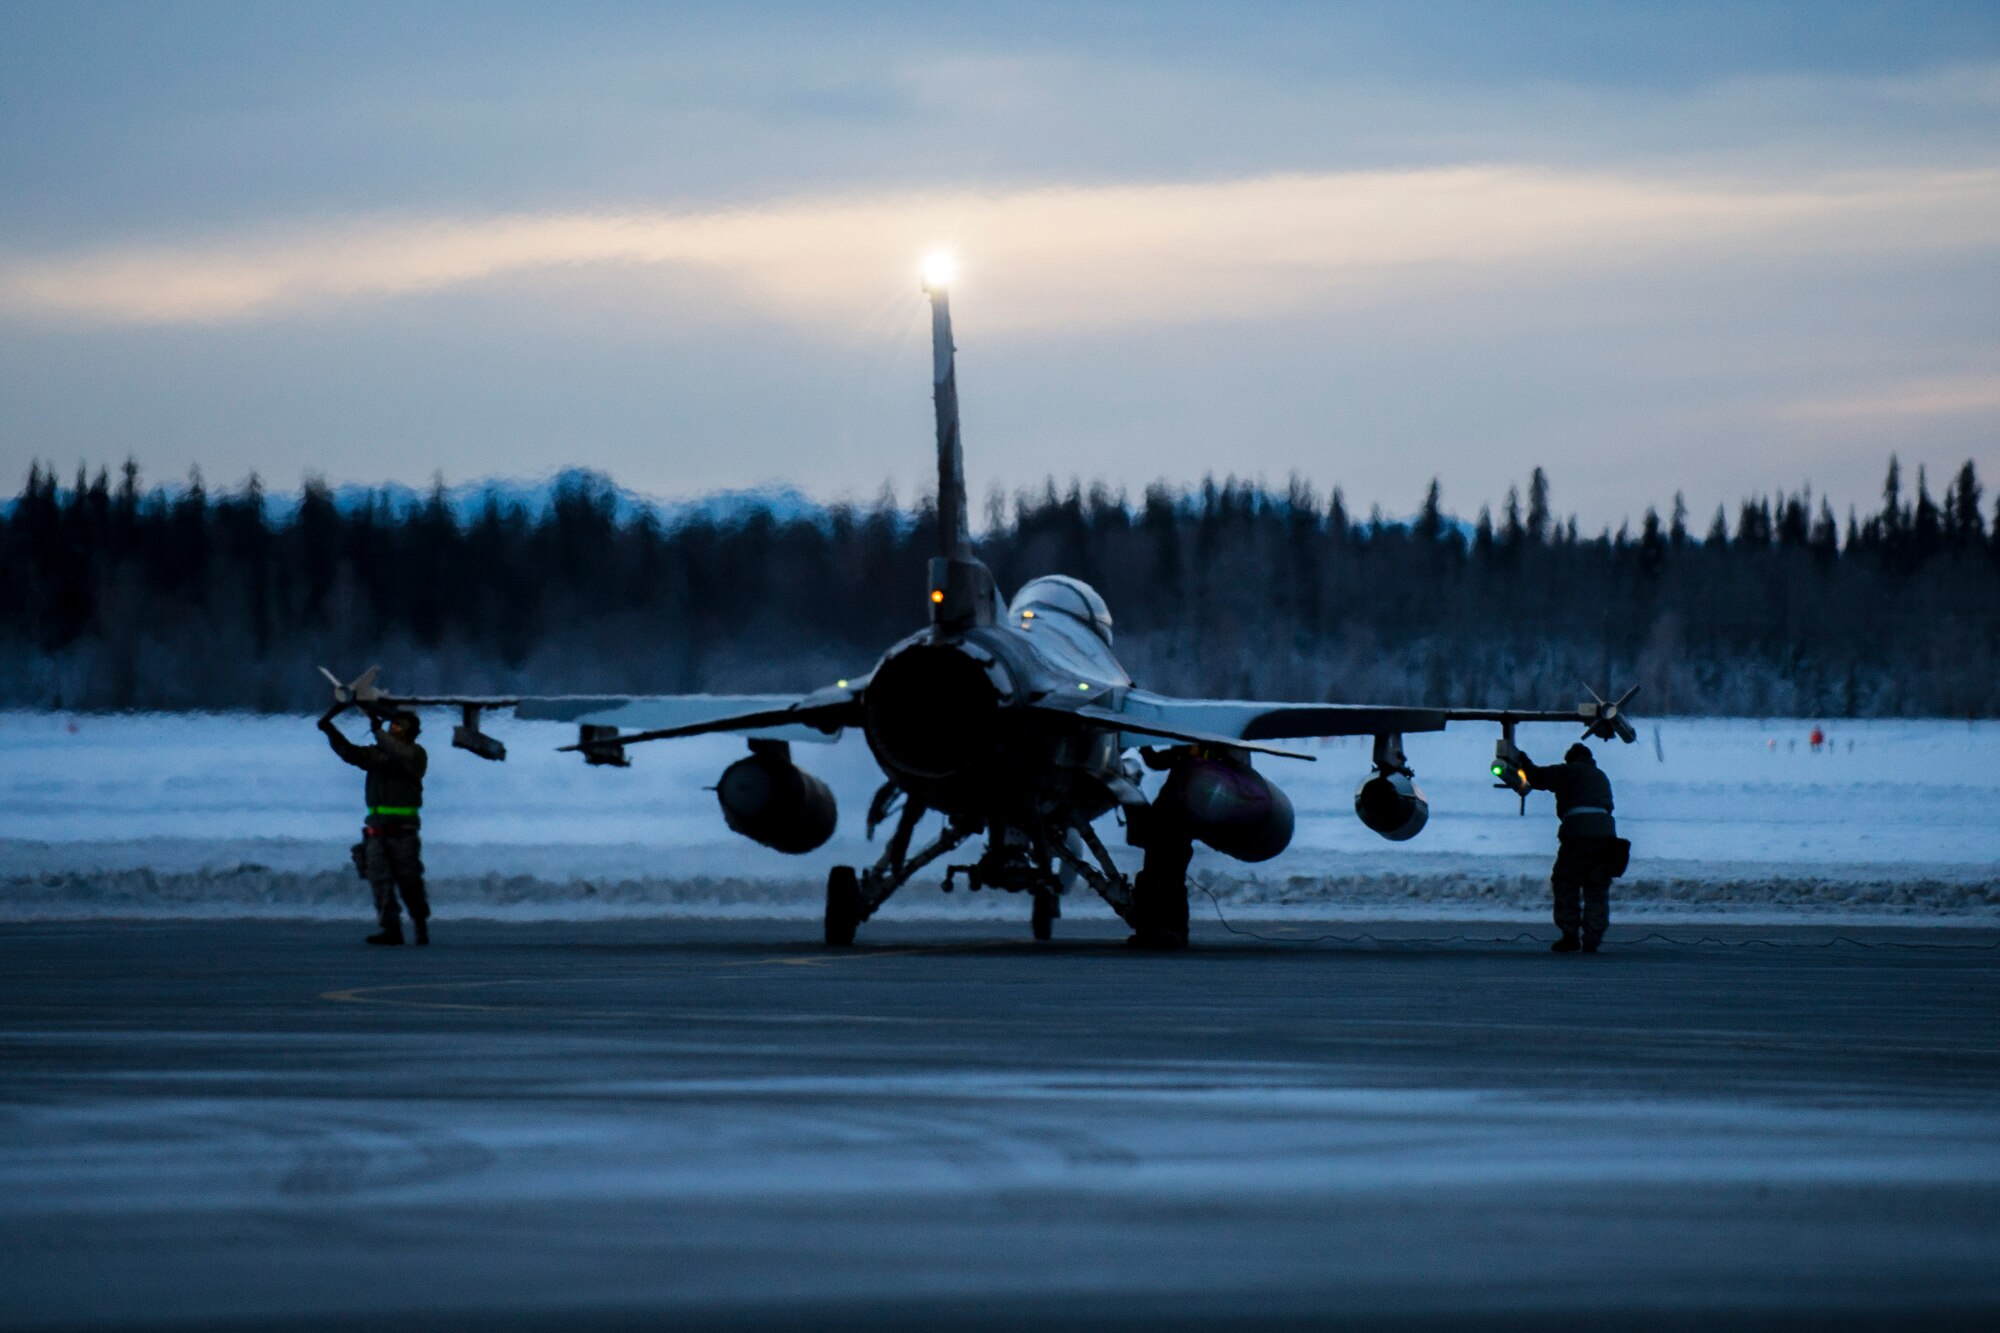 Airmen prepare an F-16 Fighting Falcon aircraft Jan. 17, 2015, on Eielson Air Force Base, Alaska, in transit to Joint Base Pearl Harbor-Hickam, Hawaii, and Andersen Air Force Base, Guam. More than 150 maintainers will keep the 18th Aggressor Squadron in the air during Pacific Air Forces exercises, which are meant to prepare Airmen, Sailors and Marines, along with coalition partners in the Pacific theater, of operations for contingency operations if the need arises. The Airmen are from the 354th Aircraft Maintenance Squadron. (U.S. Air Force photo/Staff Sgt. Joshua Turner)